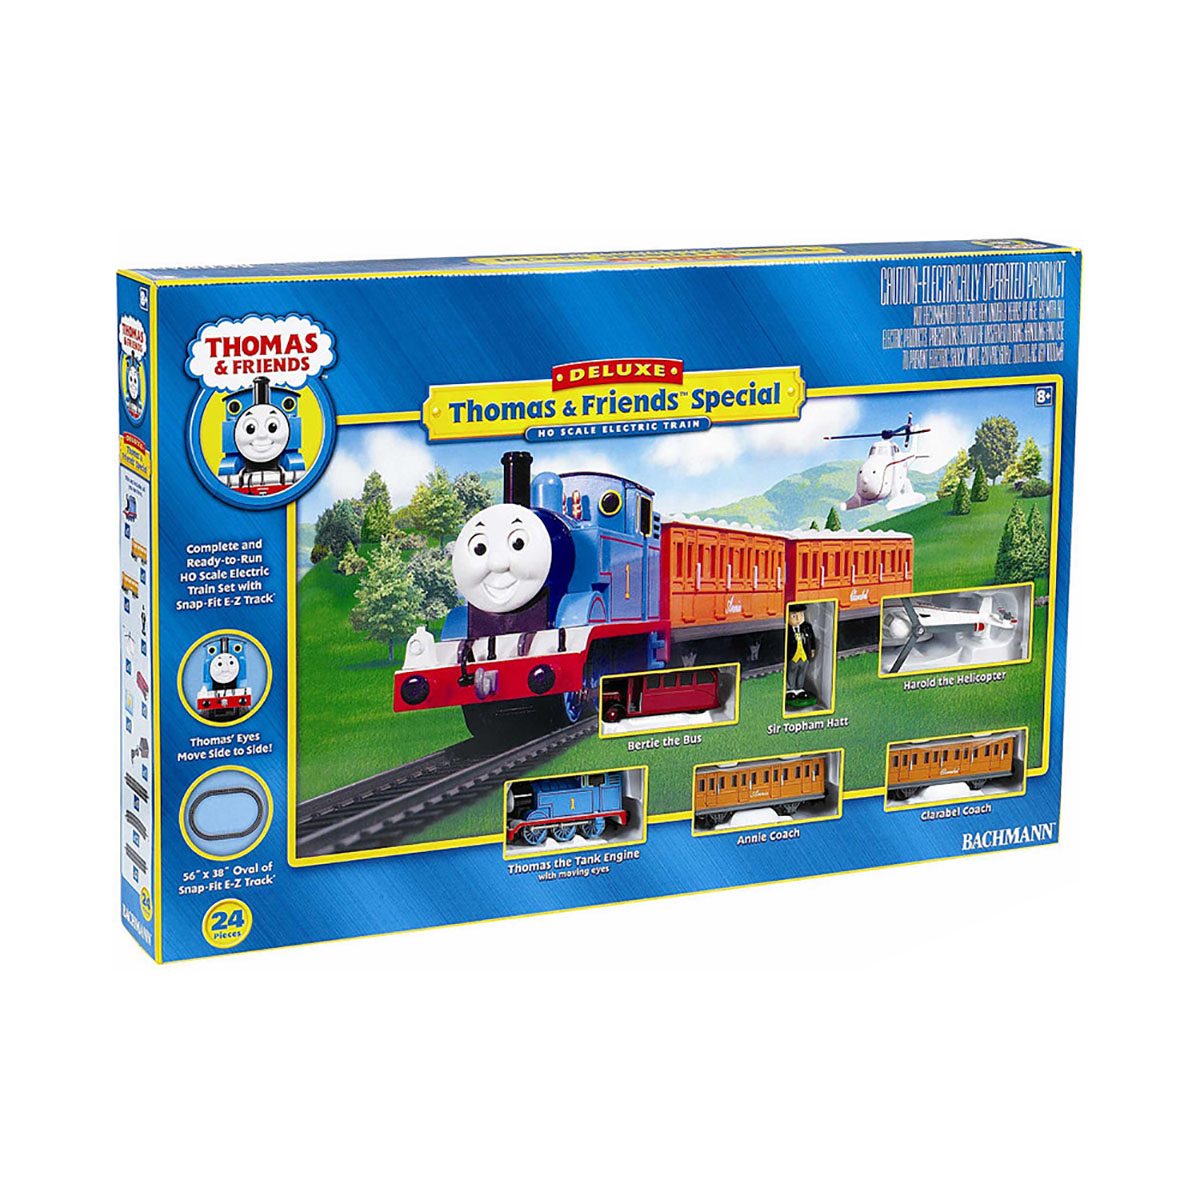 BACHMANN #644 HO SCALE THOMAS AND FRIENDS™ DELUXE TRAIN SET